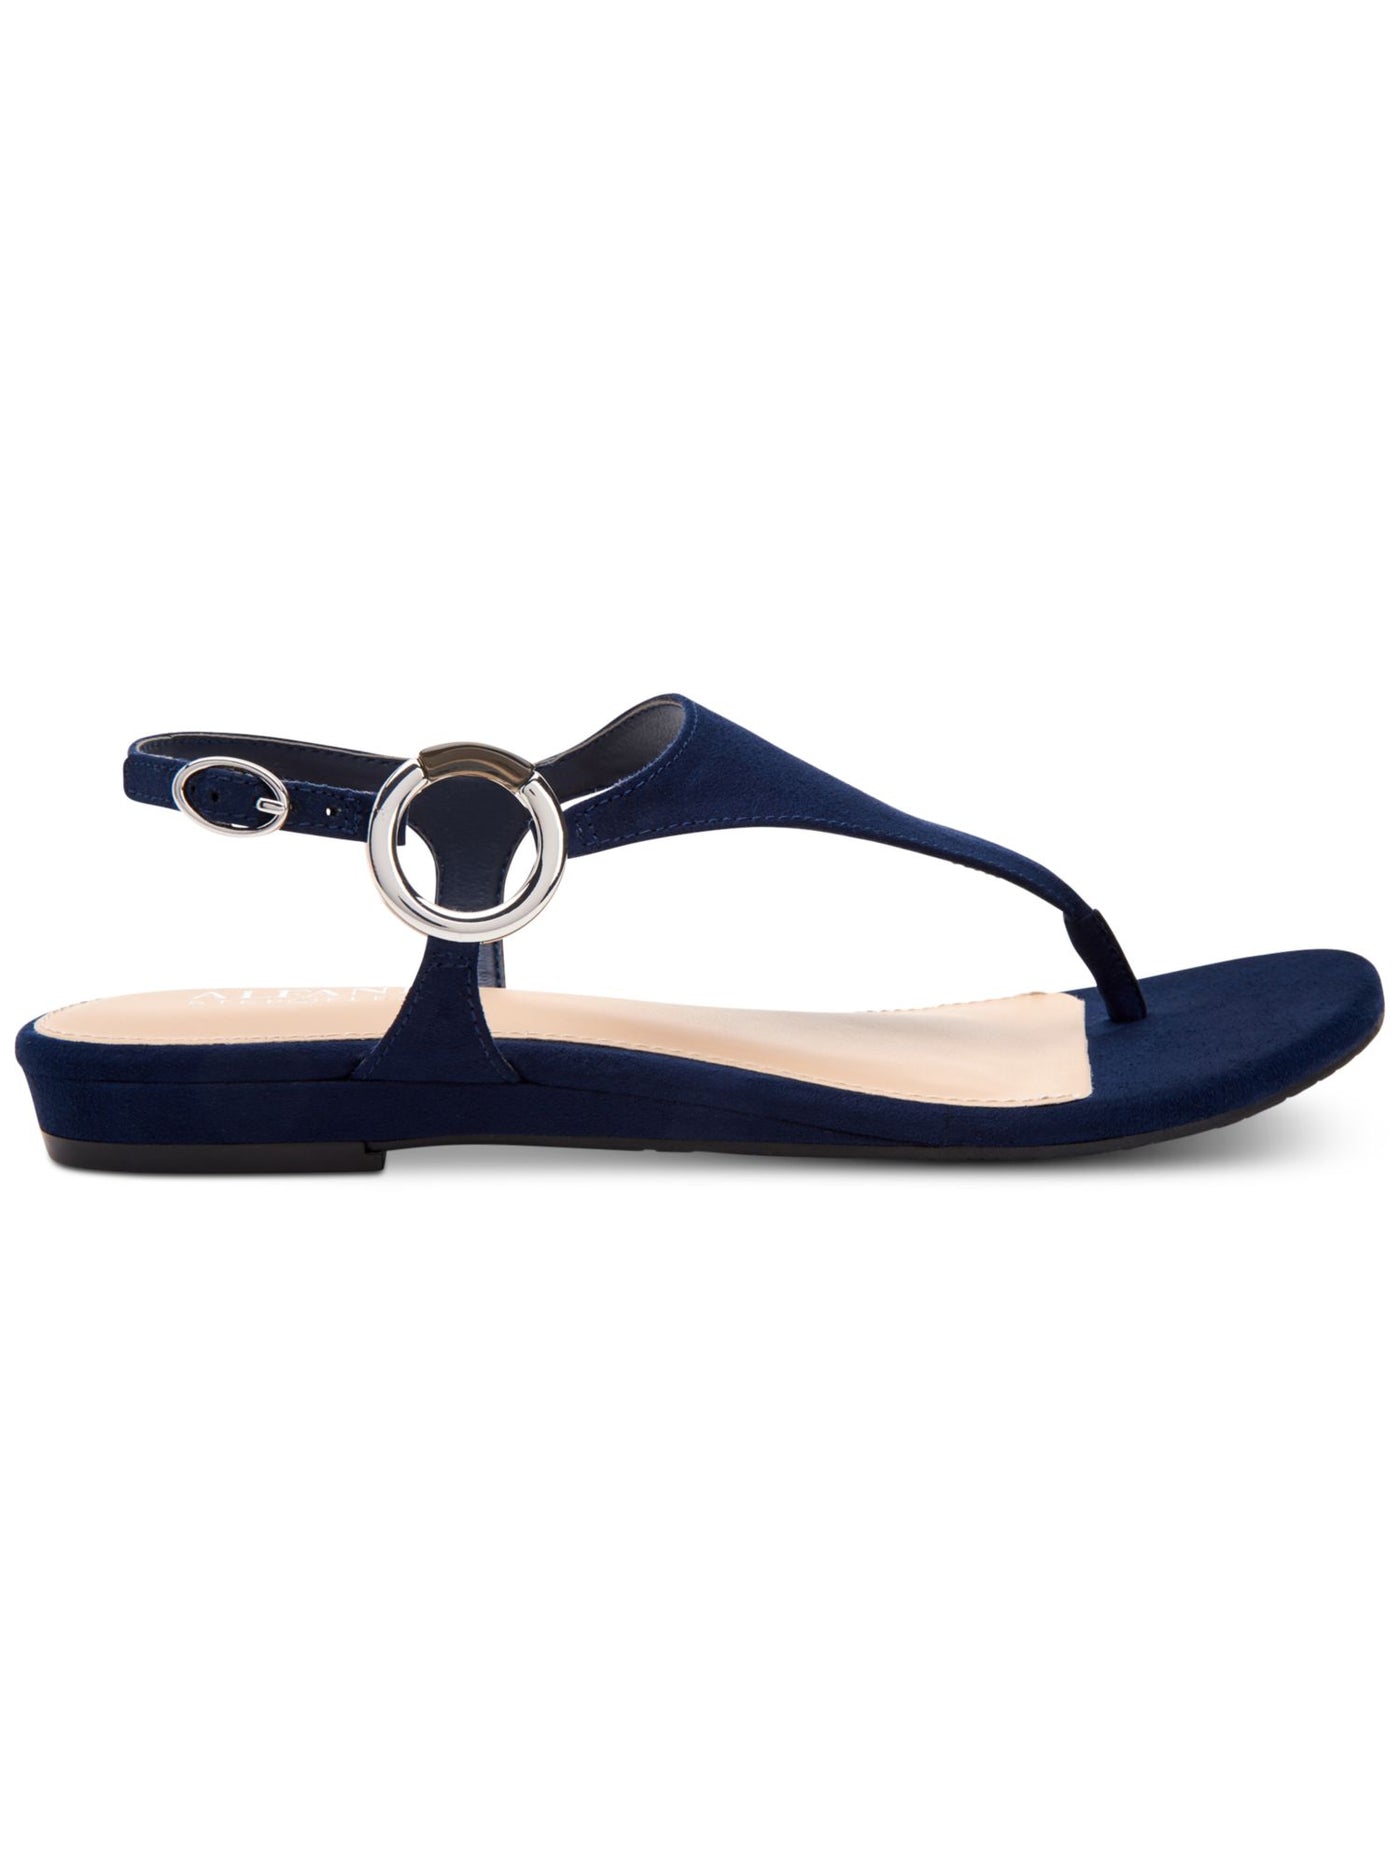 ALFANI Womens Navy Slingback Adjustable Hayyden Round Toe Buckle Thong Sandals Shoes 6.5 M